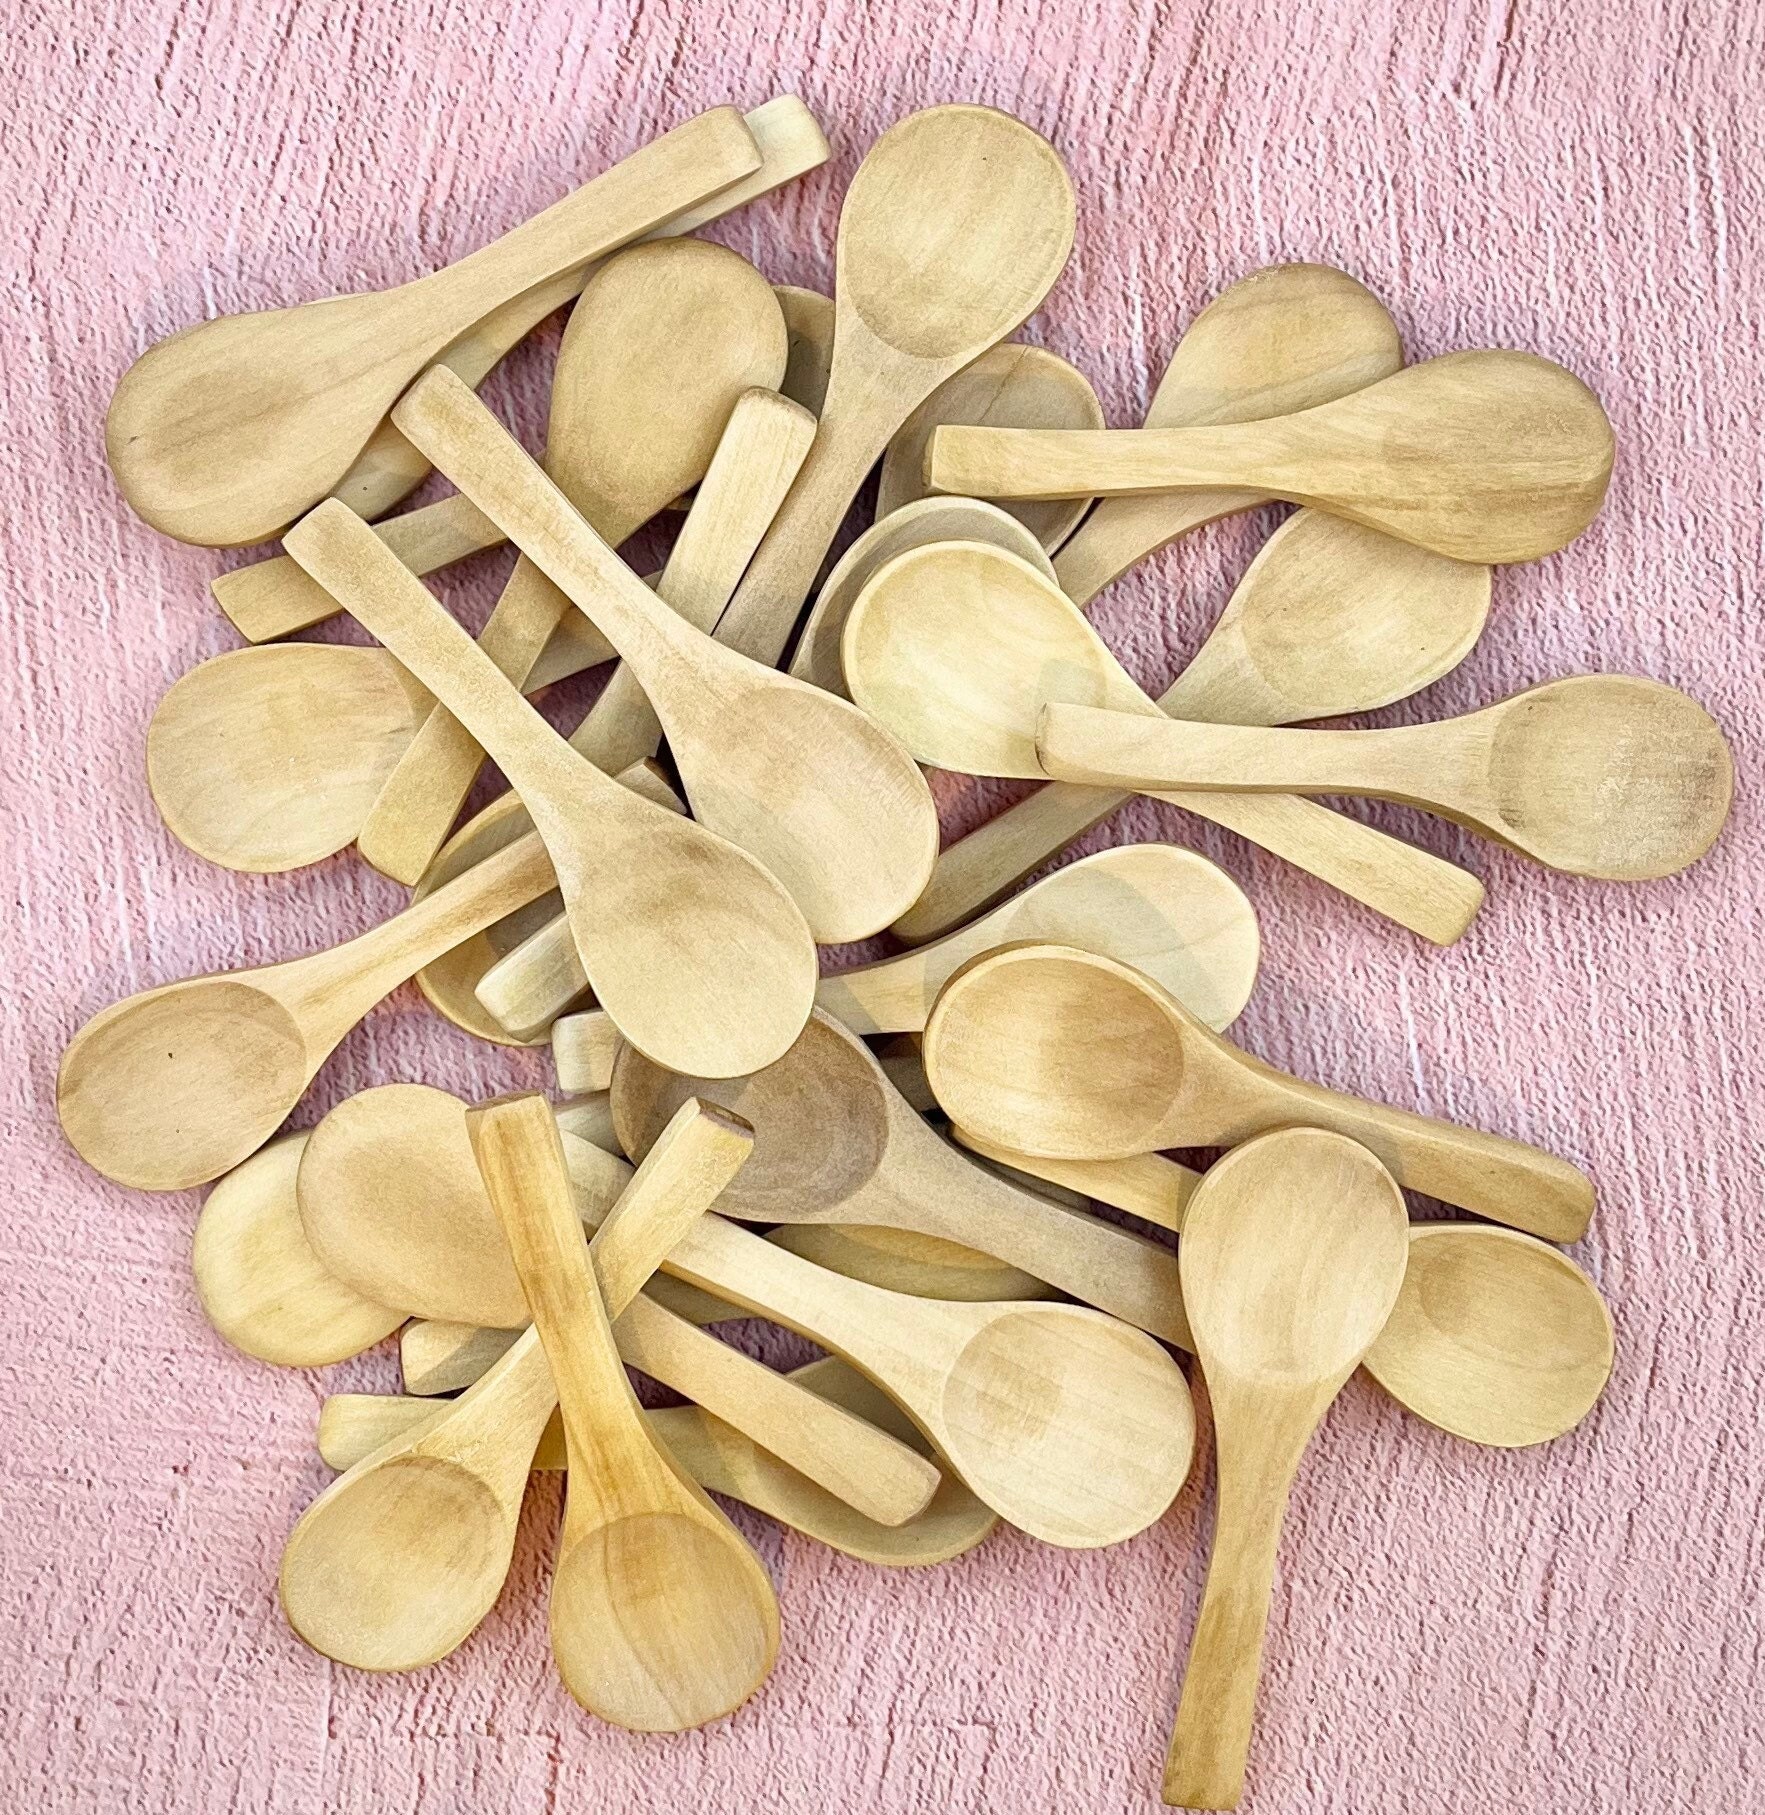 Large Wooden Scoops Unfinished 8 inch, Pack of 5 Birch Wooden Scoops for  Canisters, Flour & Sugar Containers and Bath Salts, by Woodpeckers